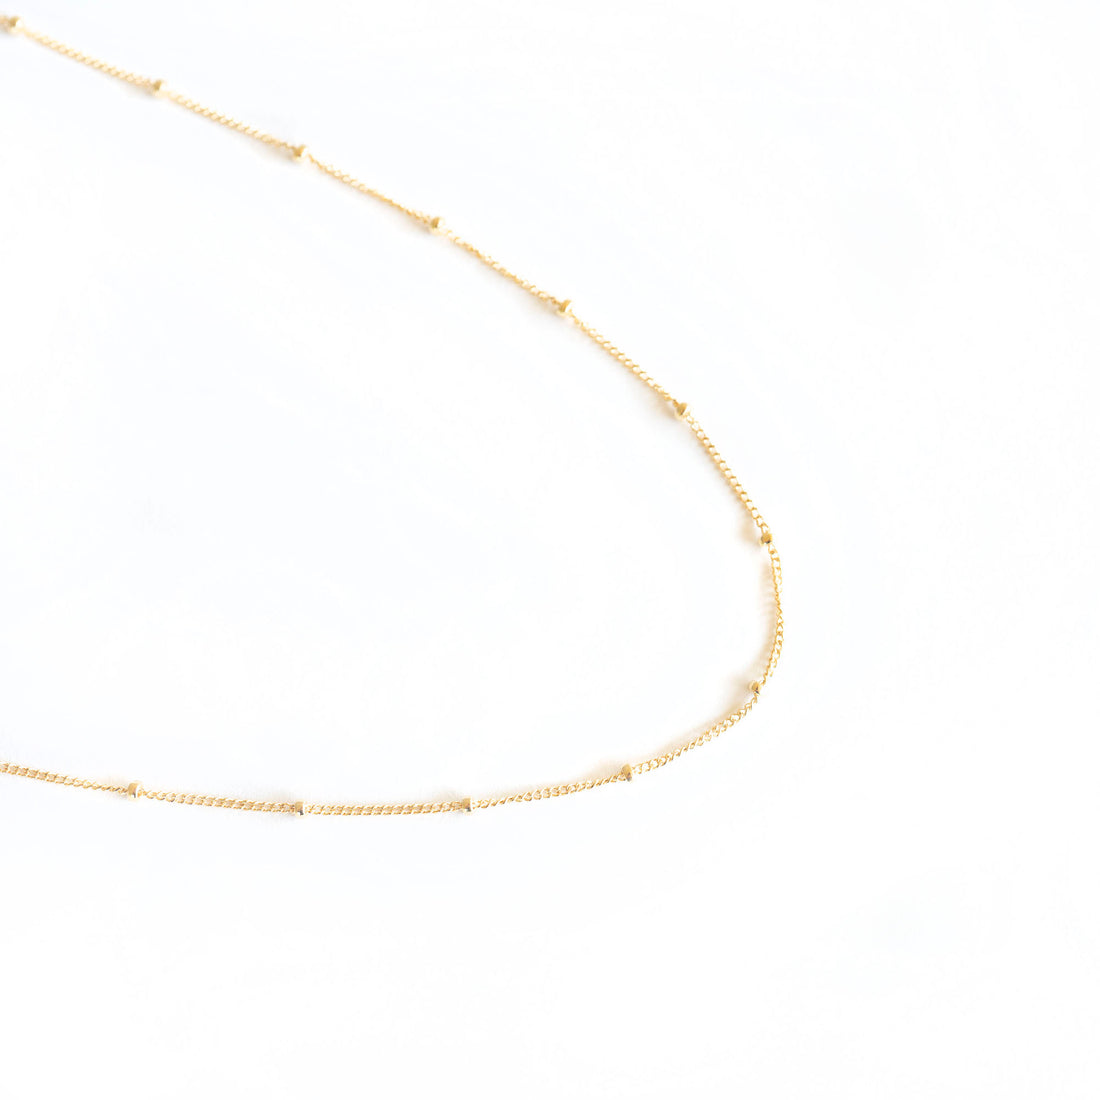 Gold Satellite Chain w/ 1.8mm Beads – Brianne and Co.